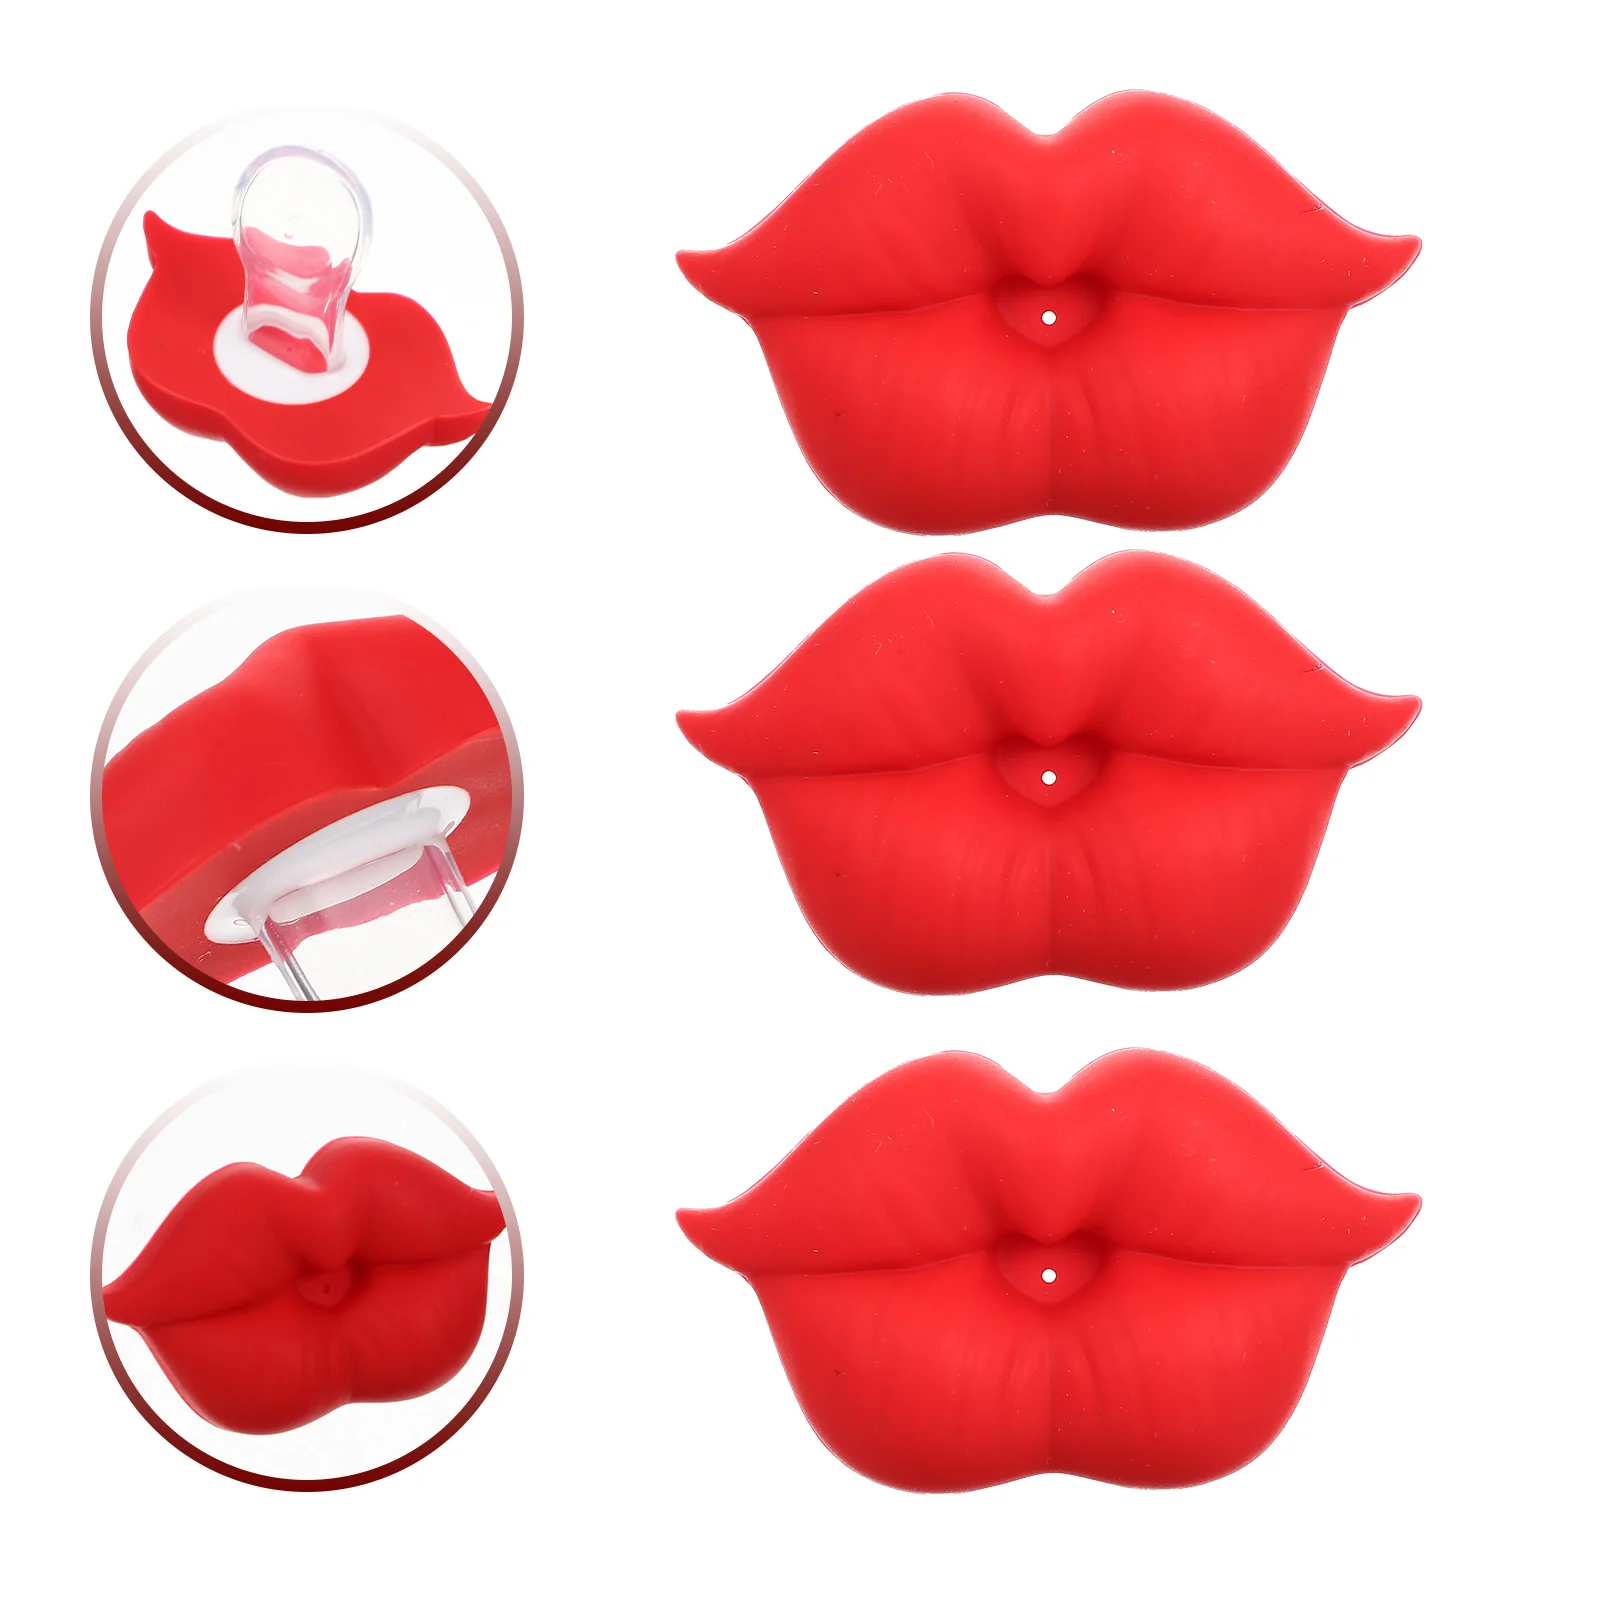 

3 Pcs Silicone Pacifier Lip Funny Infant Comforting Supply Toy Tool Pacifiers Silica Gel Baby